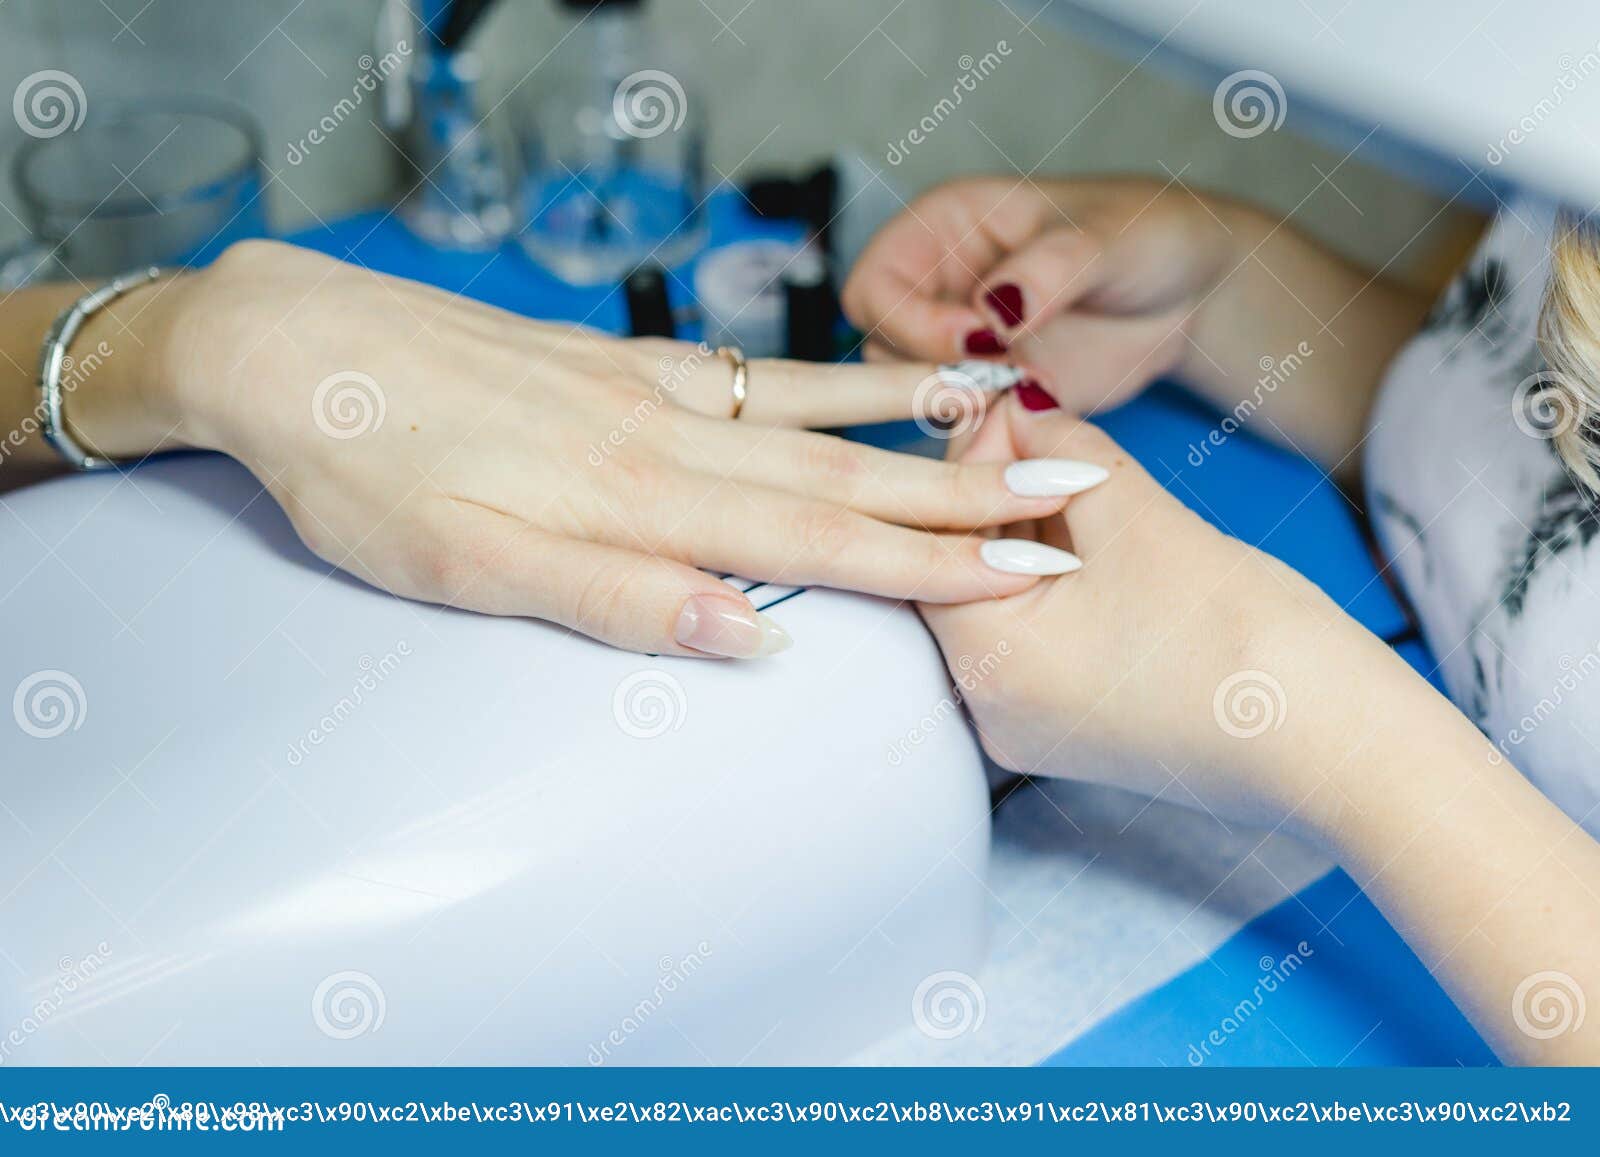 manicure. the woman cleans and paints nails. the woman processes nails on hands a varnish. shelak. gel, a varnish, placing acryle